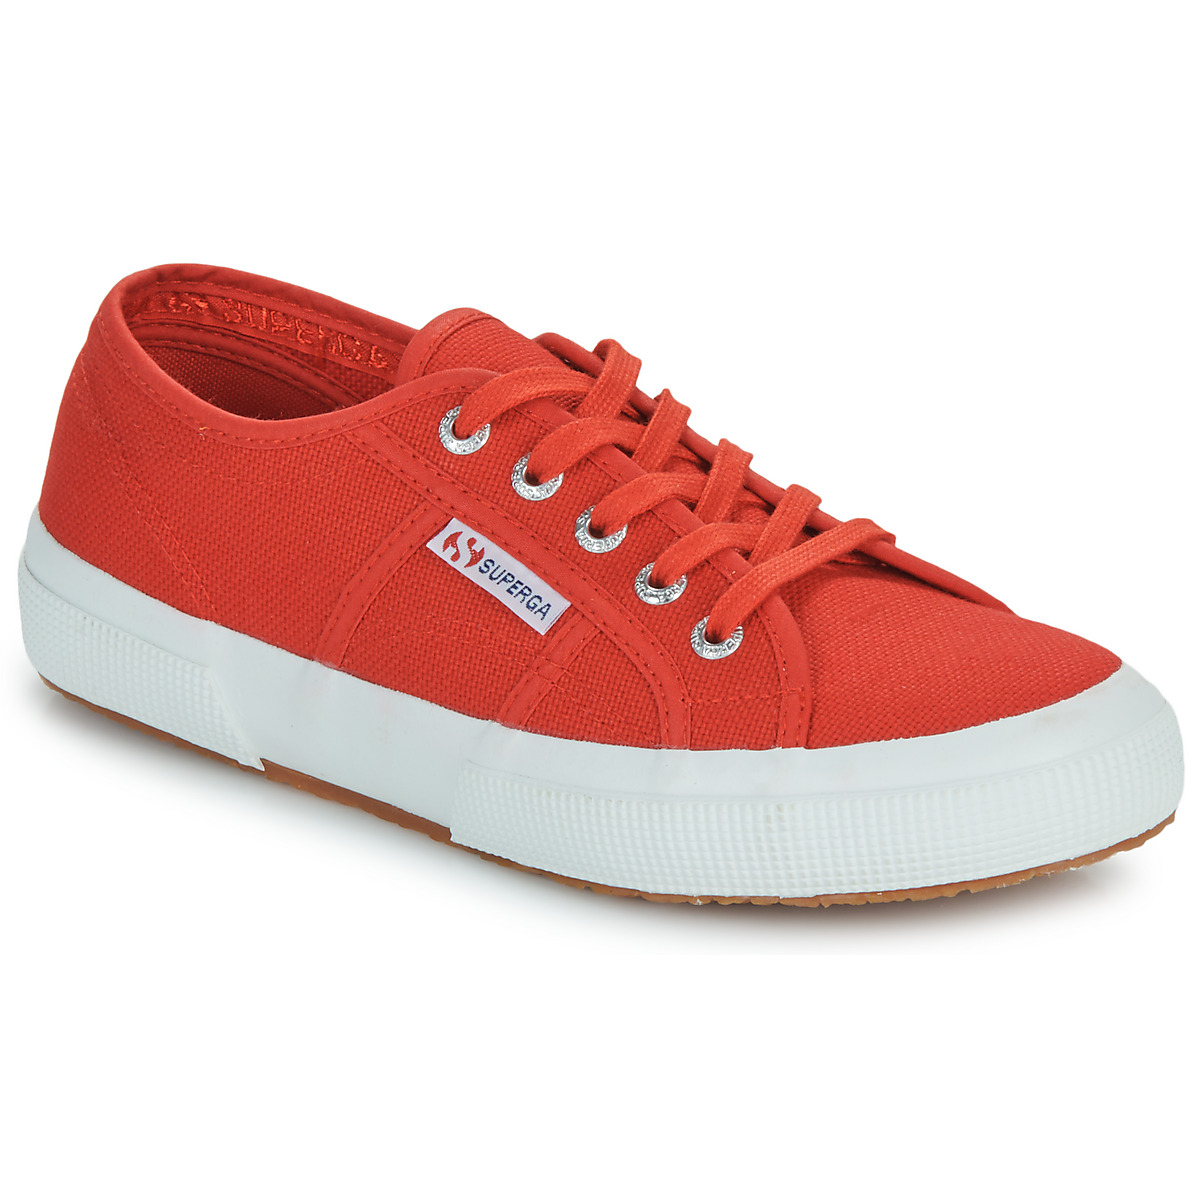 Chaussures Femme Ados 12-16 ans 2750 COTON Rouge